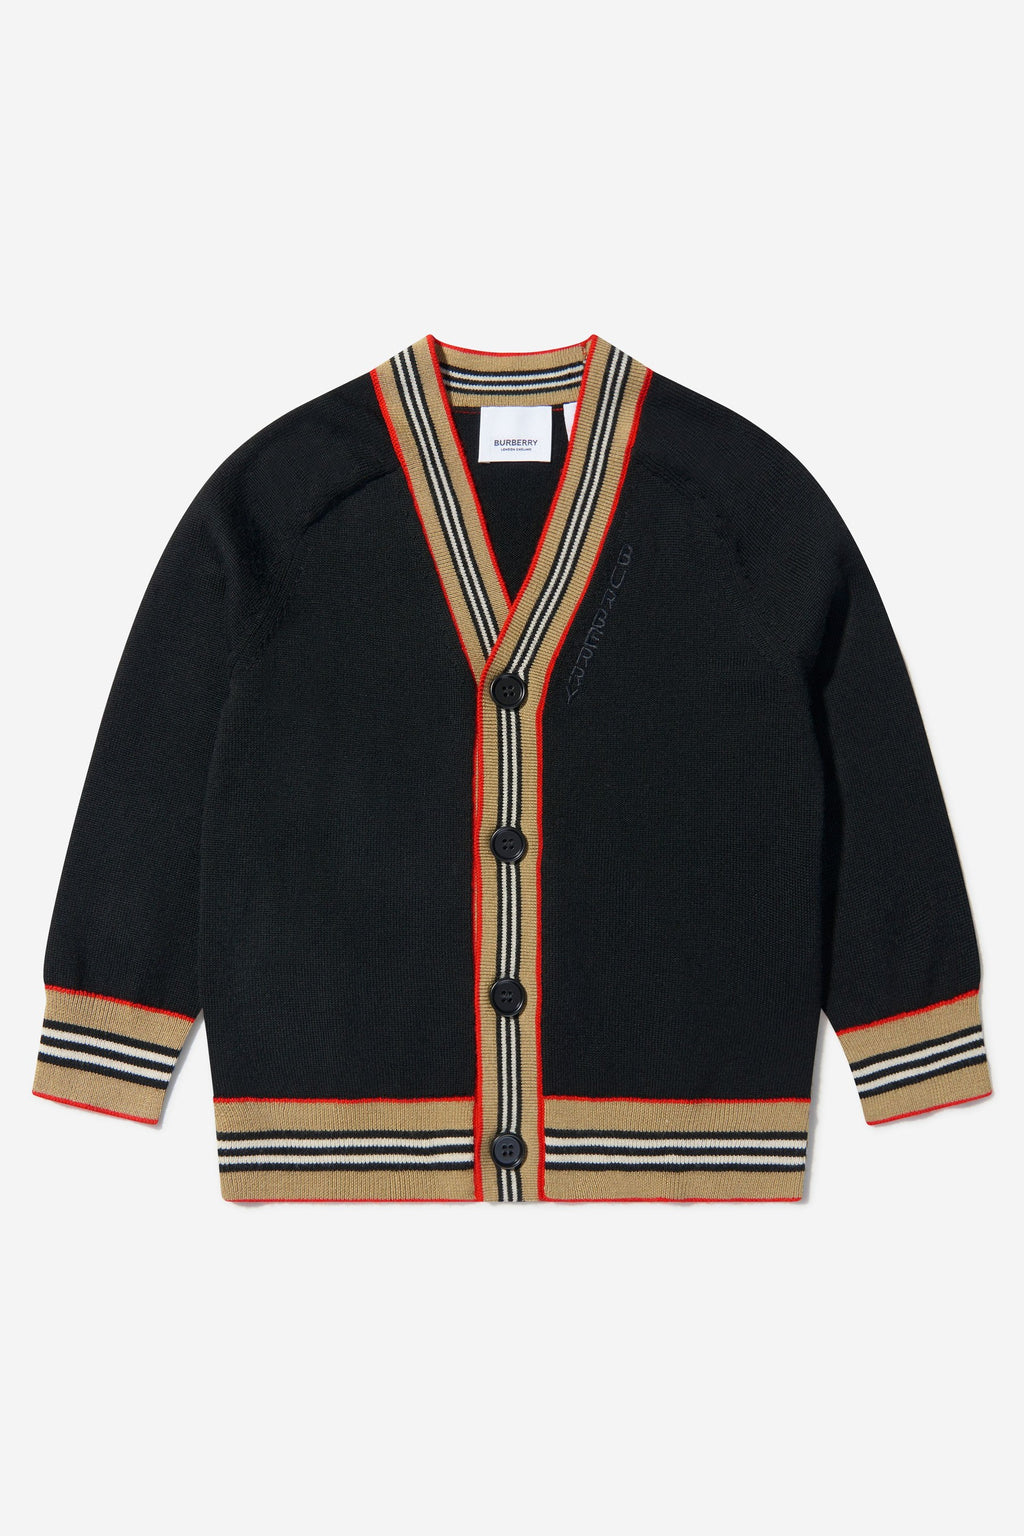 Johnny button-up cardigan, Burberry Kids